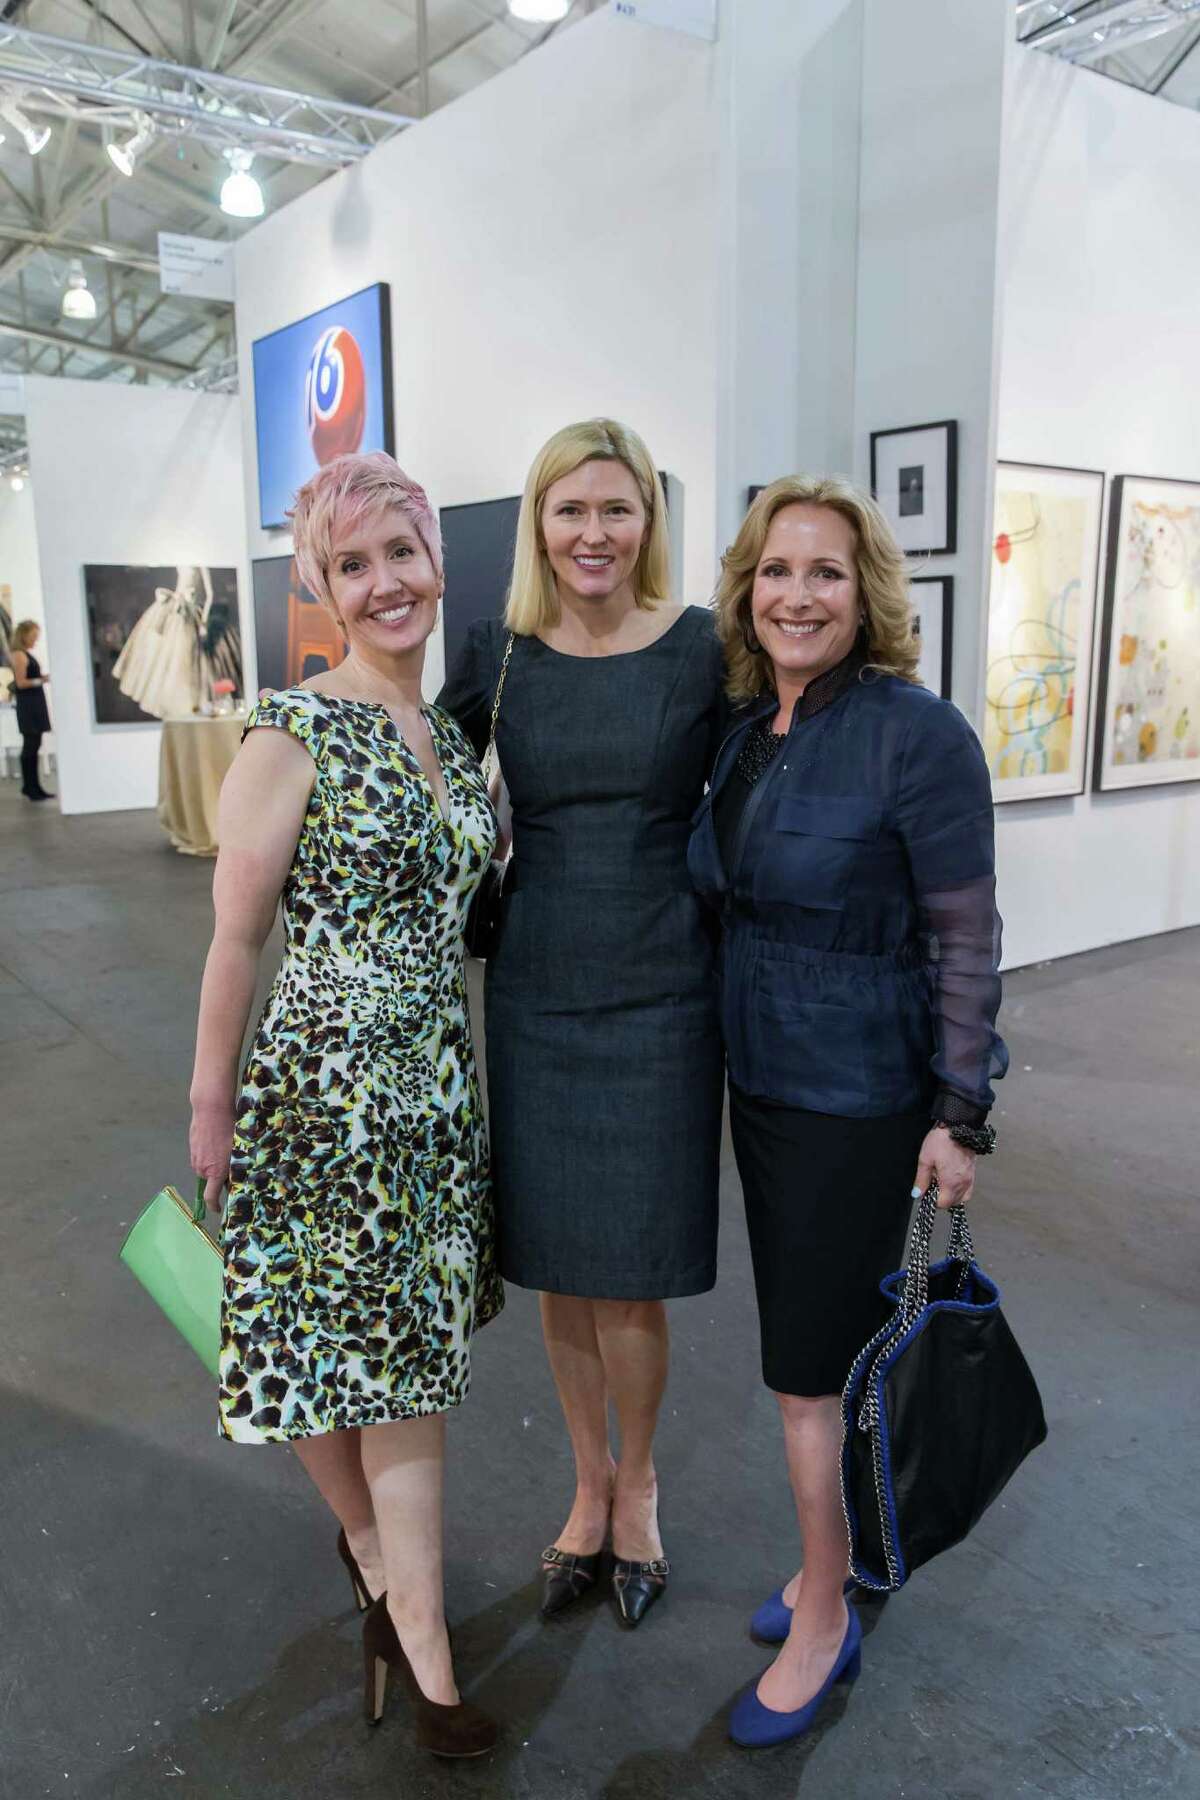 Lisa Sardegna, Lauren Hall and Lorre Erlick at the Art Market San Francisco Benefit Preview Reception on April 29, 2015.